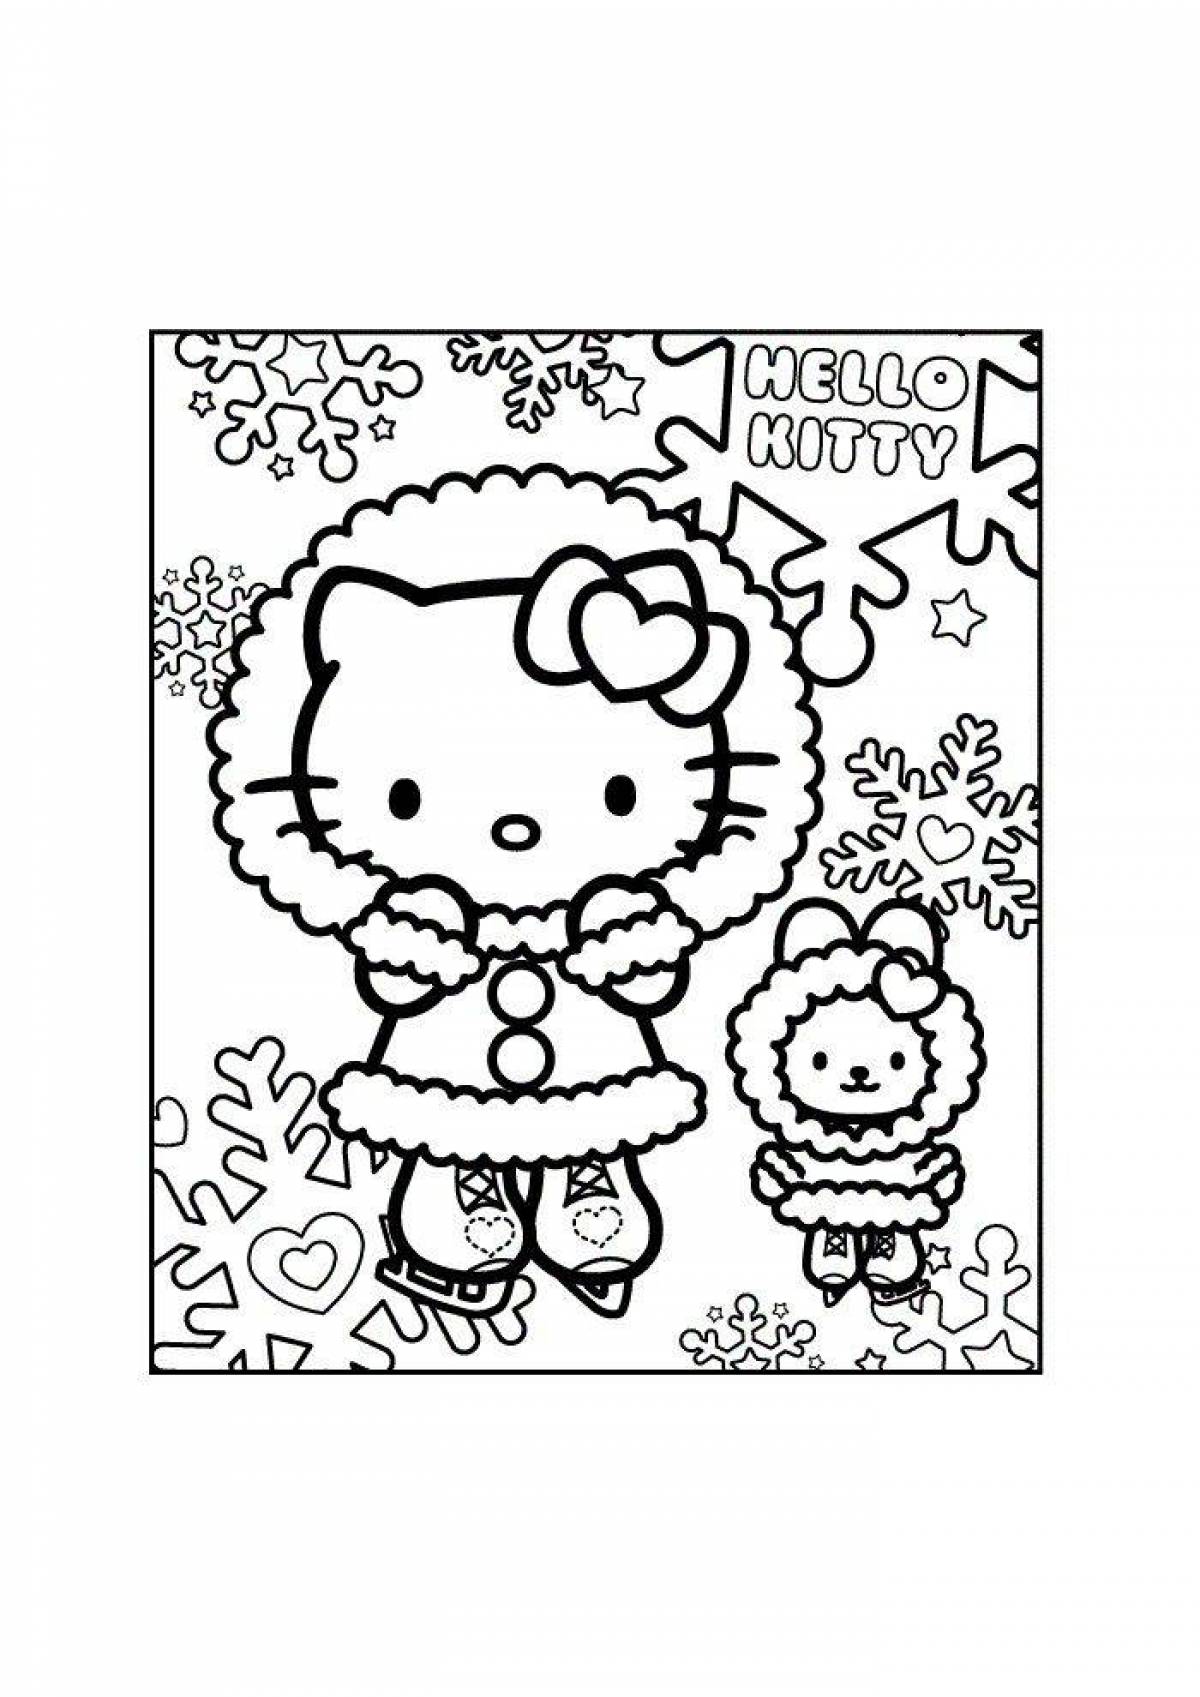 Colorful hello kitty coloring page